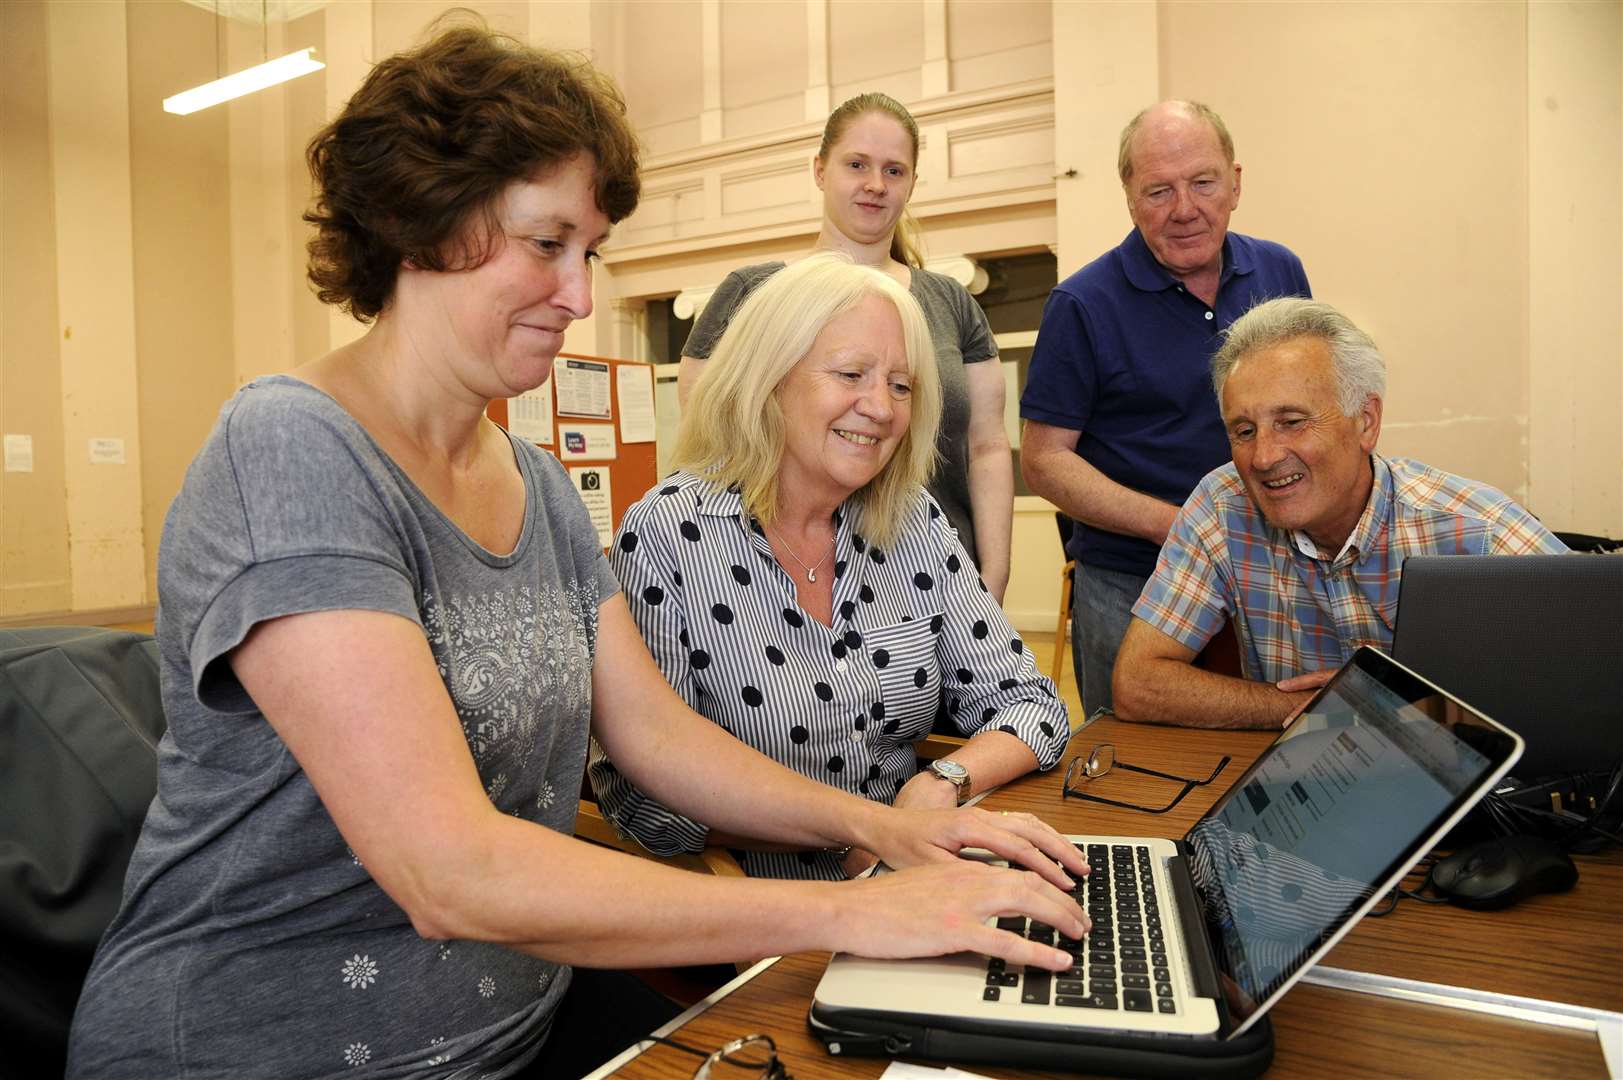 Picture: Eric Cormack. Image No.044577.Forres Community Trust Receved Funding For A Online Project. L-R User Wendy Skilton, Janice Cooper [Co-Ordinator],Lauren Causier, Jamie Nicol And Steven Skidmore..See gary.